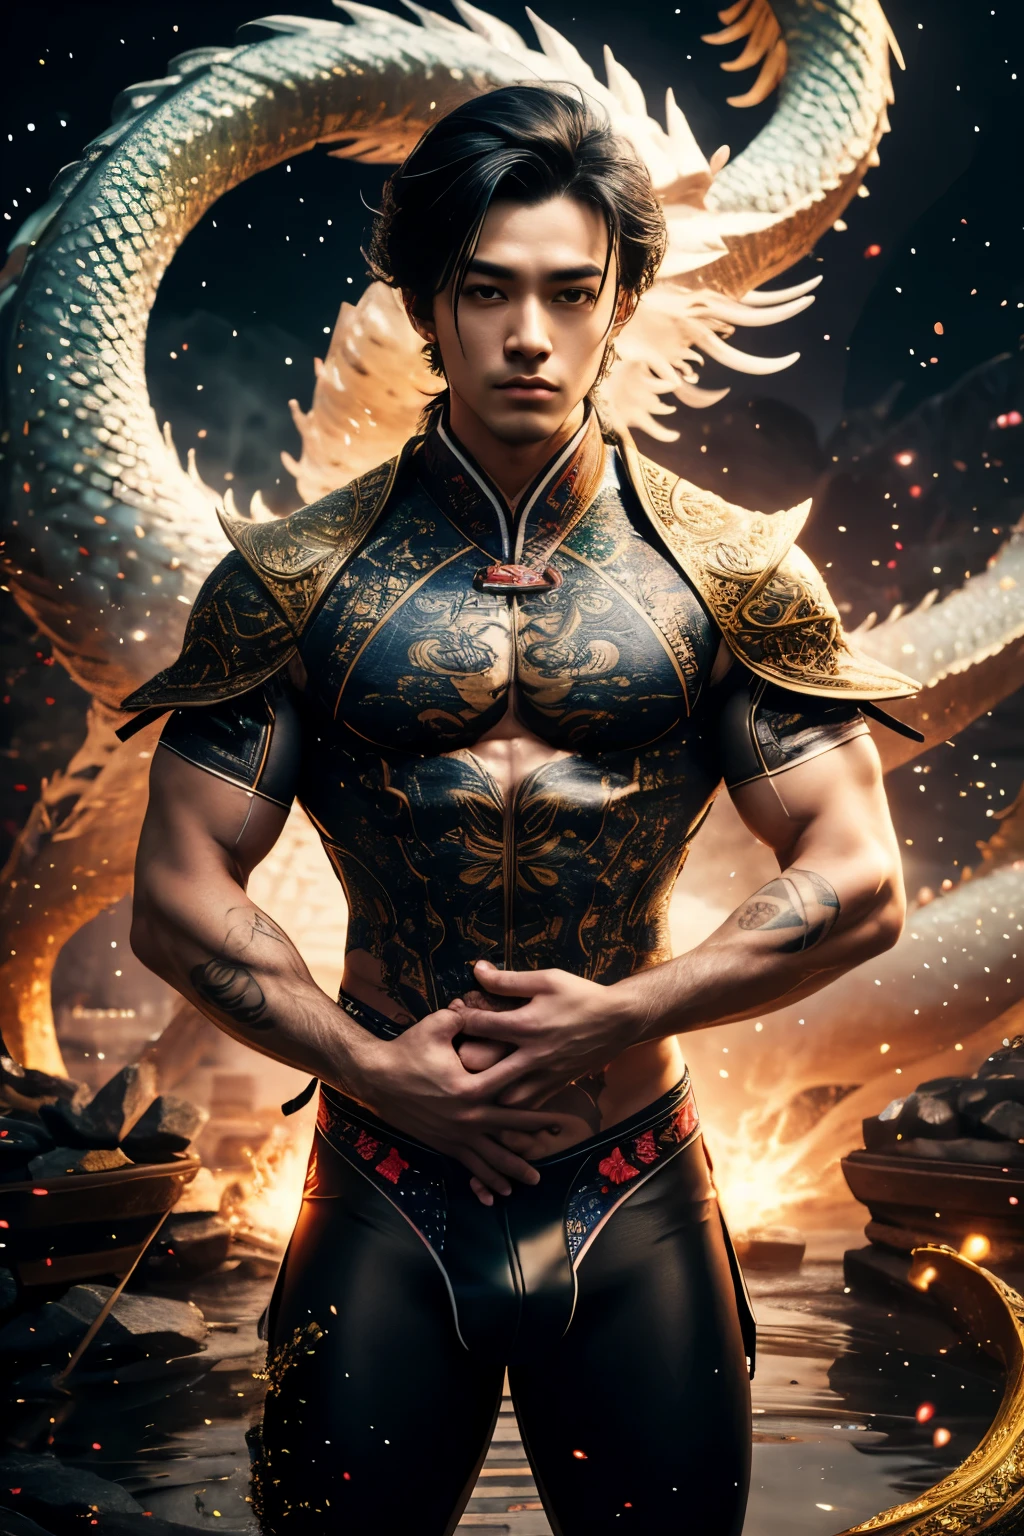 Handsome guy, 25 years old, Asian, master work, best picture quality, higher quality, high detail, super high resolution, 8k resolution, delicate facial features, boy, big muscles, tattoos, glowing eyes, short hair, hair details, [[Look away, look to the side, emphasize homosexuality and pay attention to every detail , open Hanfu transparent tulle jacket, white rubber pants, night, starry sky, flying flowers. Waterfalls, mountains, circling dragons, Chinese courtyard background (((((crotch bulge)))))